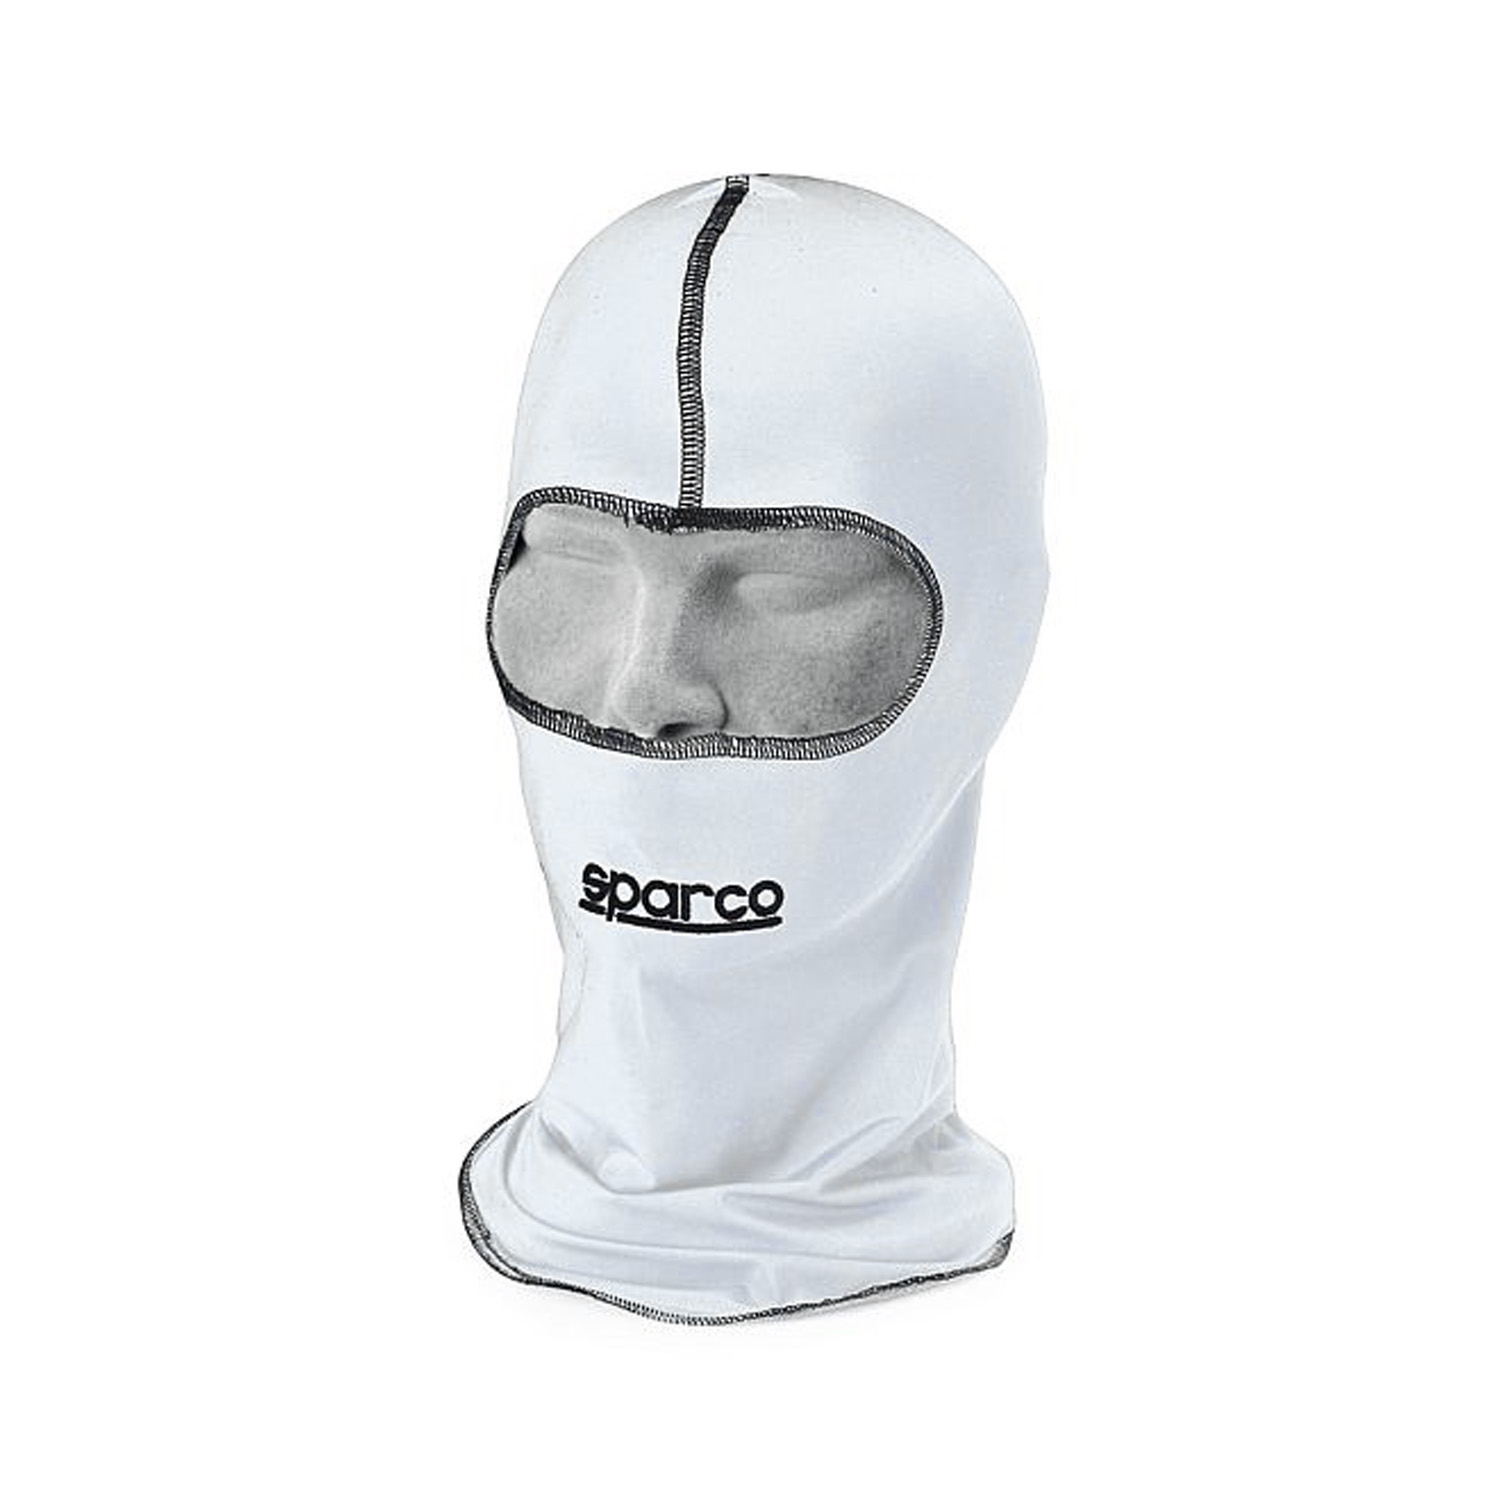 Cagoule Sparco Rw-10 Shield Pro Blanche